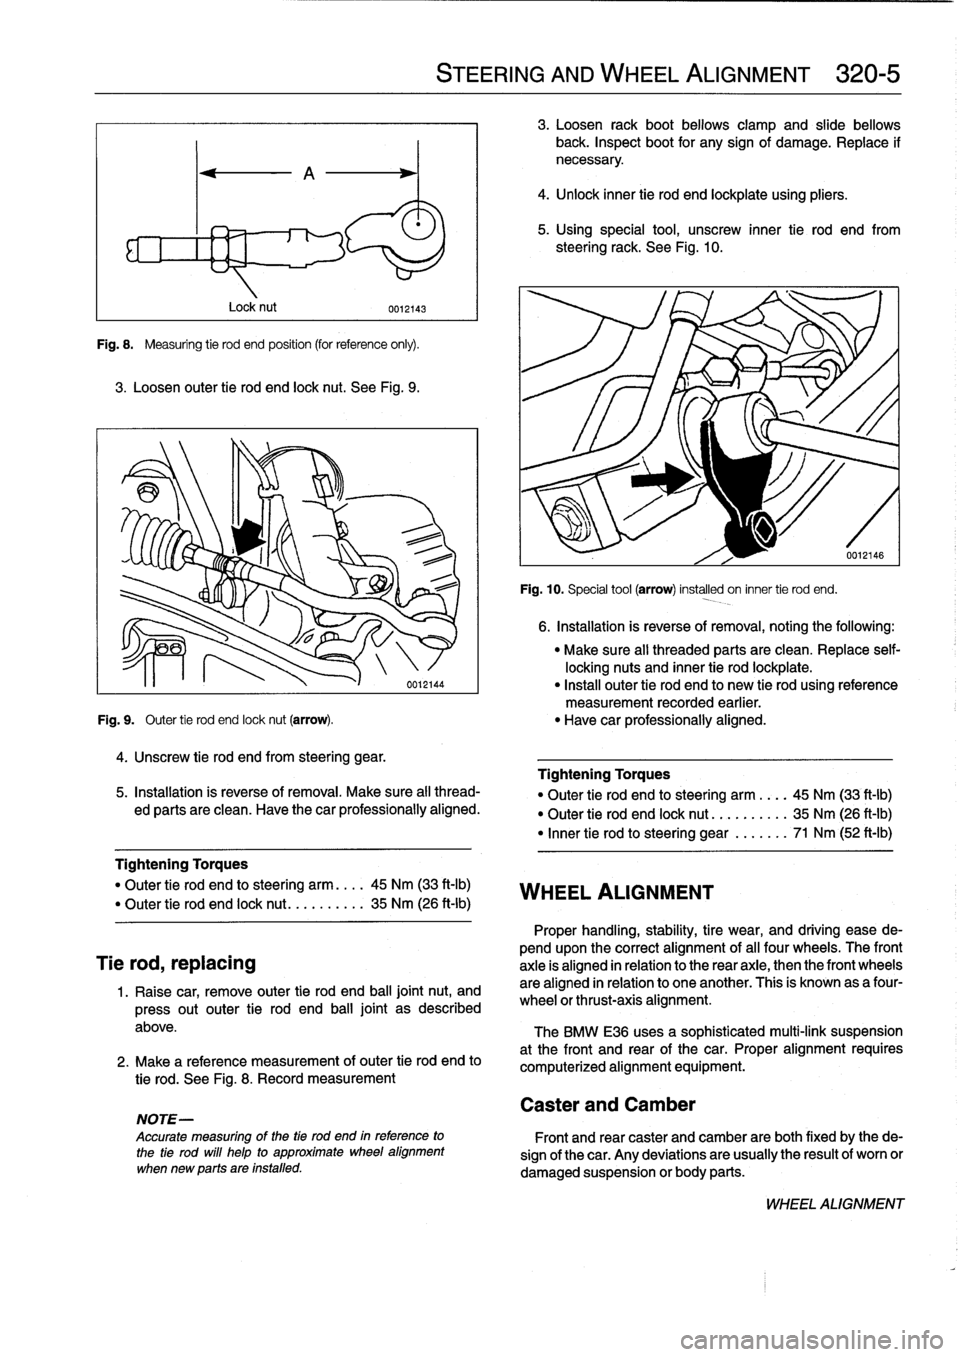 BMW M3 1993 E36 Owners Manual 
Fig
.
8
.

	

Measuring
tie
rod
end
position
(for
reference
only)
.

3
.
Loosen
outer
tie
rod
end
lock
nut
.
See
Fig
.
9
.

Lock
nut

4
.
Unscrew
tie
rod
end
from
steering
gear
.

0012143

"
Make
sur